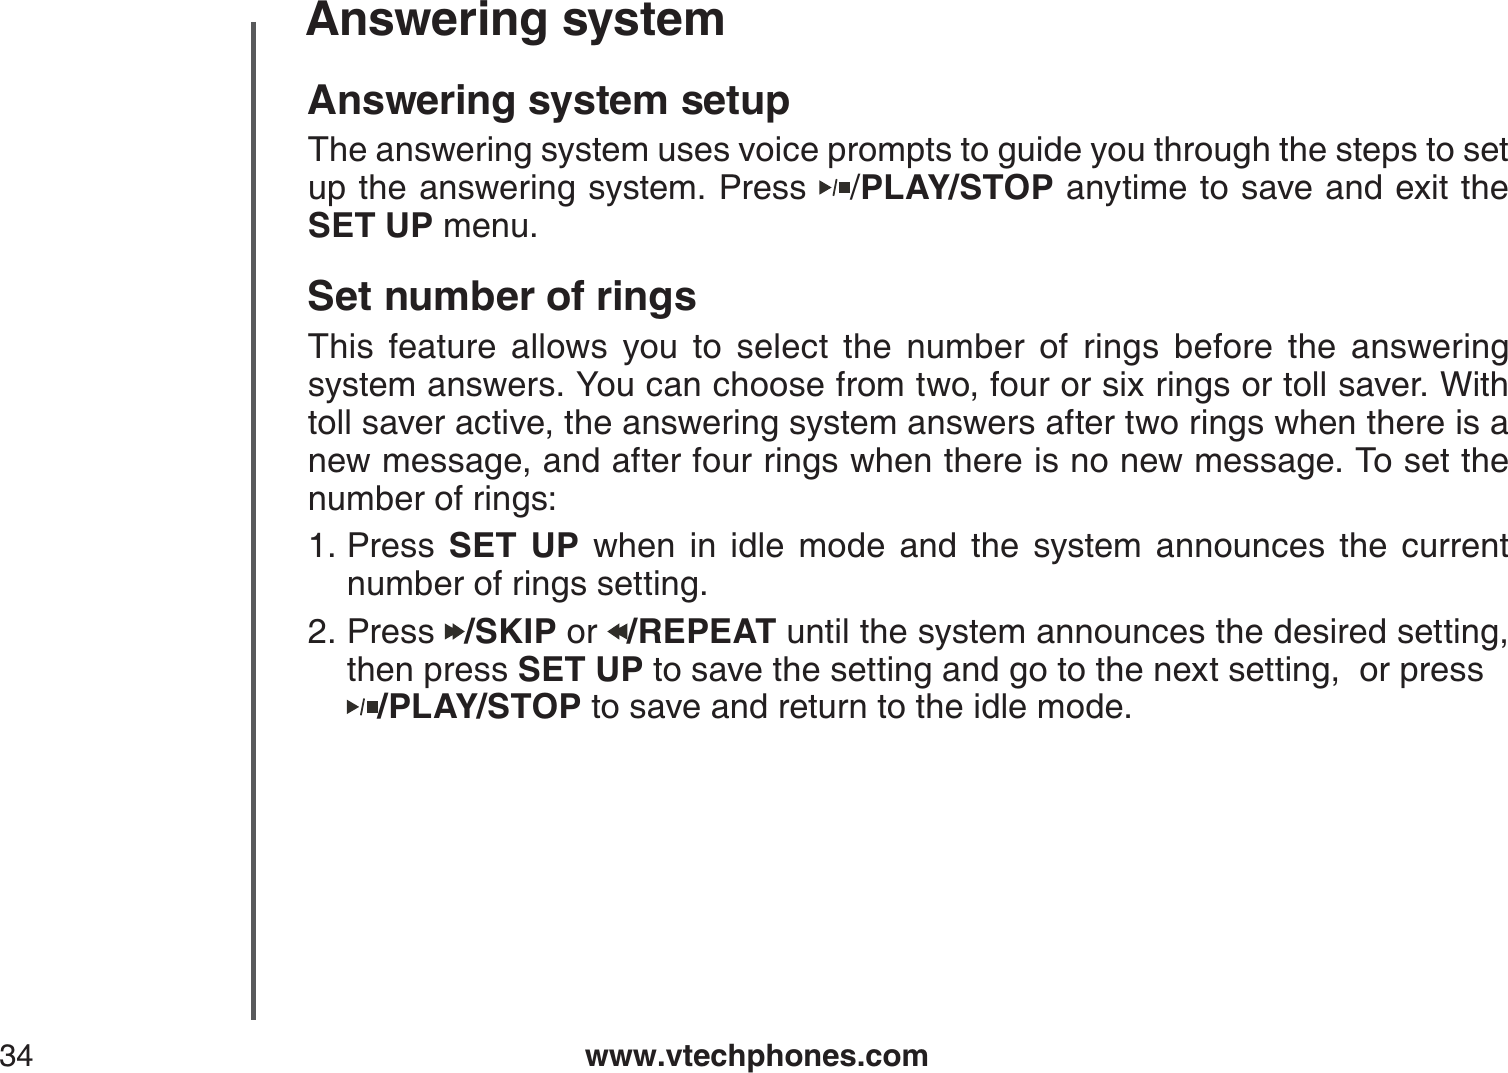 www.vtechphones.com34Answering systemAnswering system setupThe answering system uses voice prompts to guide you through the steps to set up the answering system. Press  /PLAY/STOP anytime to save and exit the SET UP menu.Set number of ringsThis feature allows you to select the number of rings before the answering system answers. You can choose from two, four or six rings or toll saver. With toll saver active, the answering system answers after two rings when there is a new message, and after four rings when there is no new message. To set the number of rings:Press  SET UP when in idle mode and the system announces the current number of rings setting.Press  /SKIP or  /REPEAT until the system announces the desired setting, then press SET UP to save the setting and go to the next setting,  or press /PLAY/STOP to save and return to the idle mode.1.2.